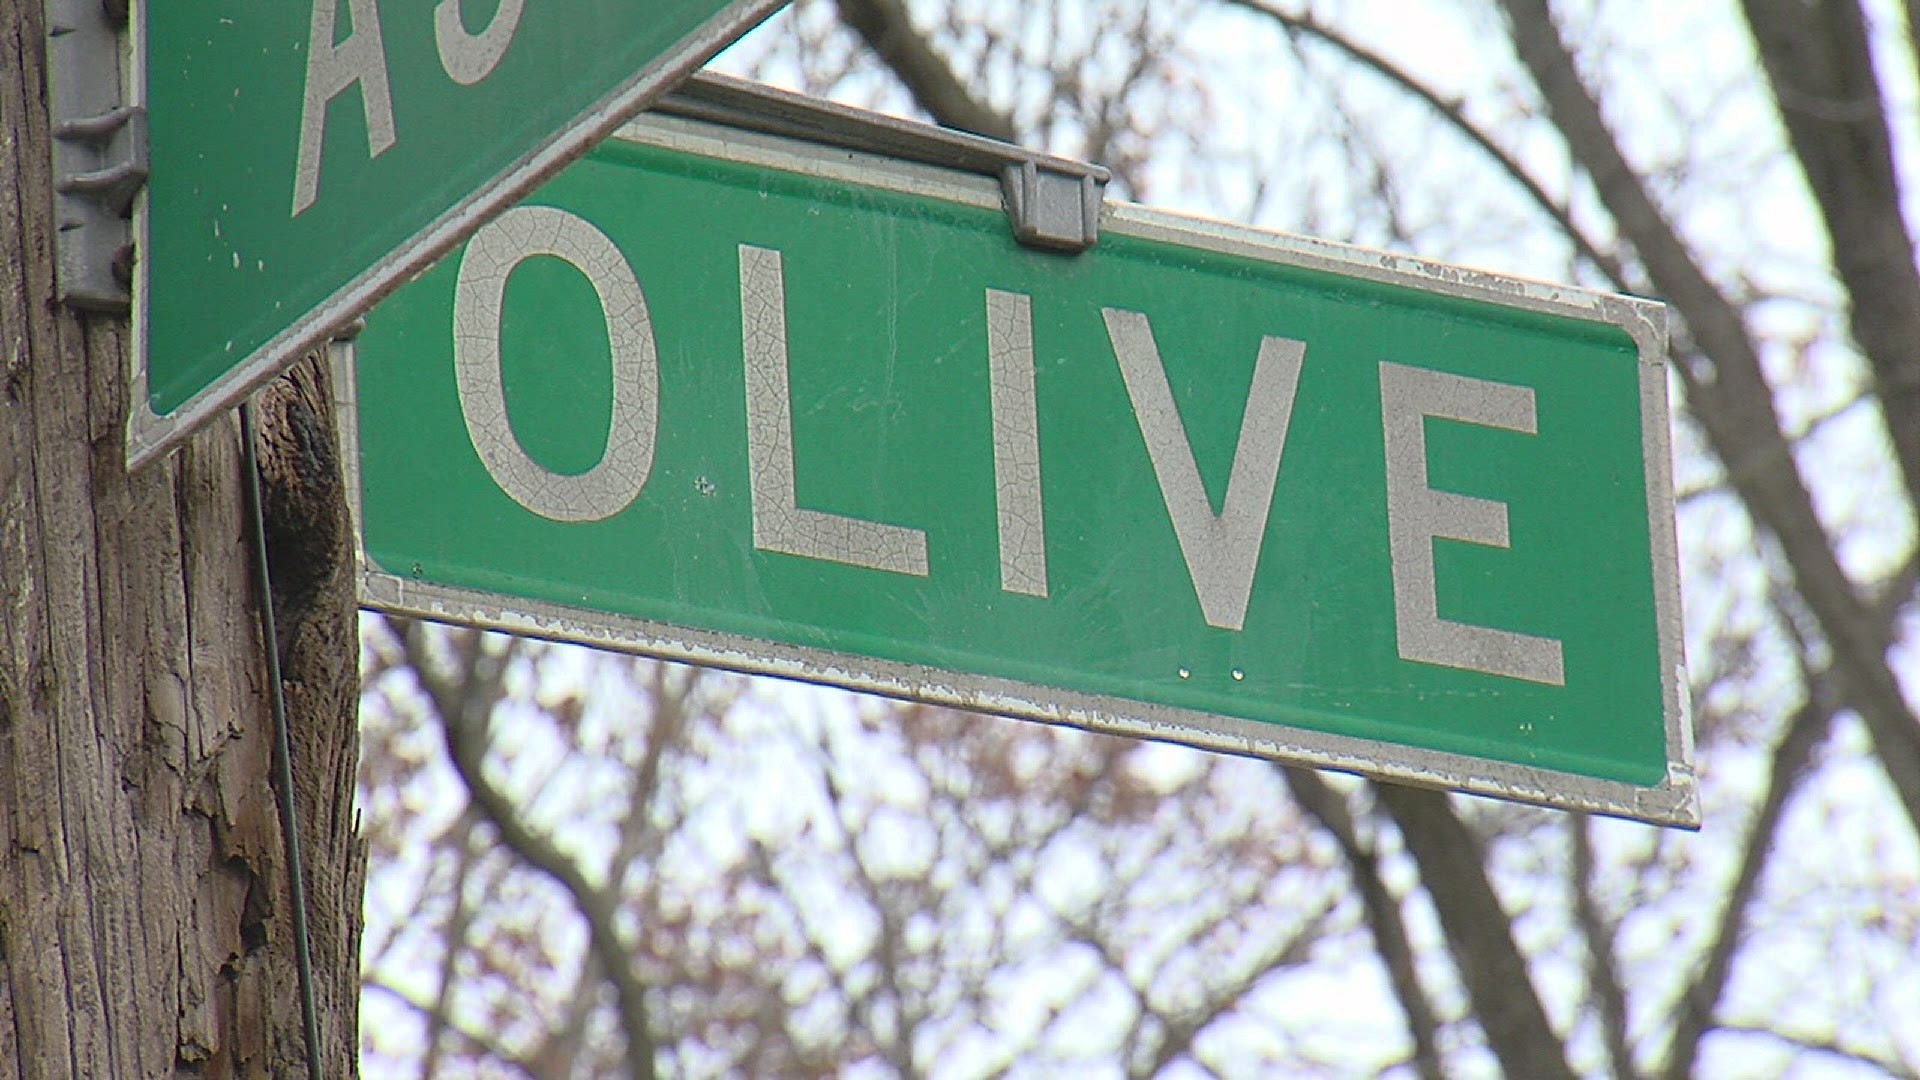 Police were called to the scene on East Olive Avenue about 10:30 a.m. Friday.